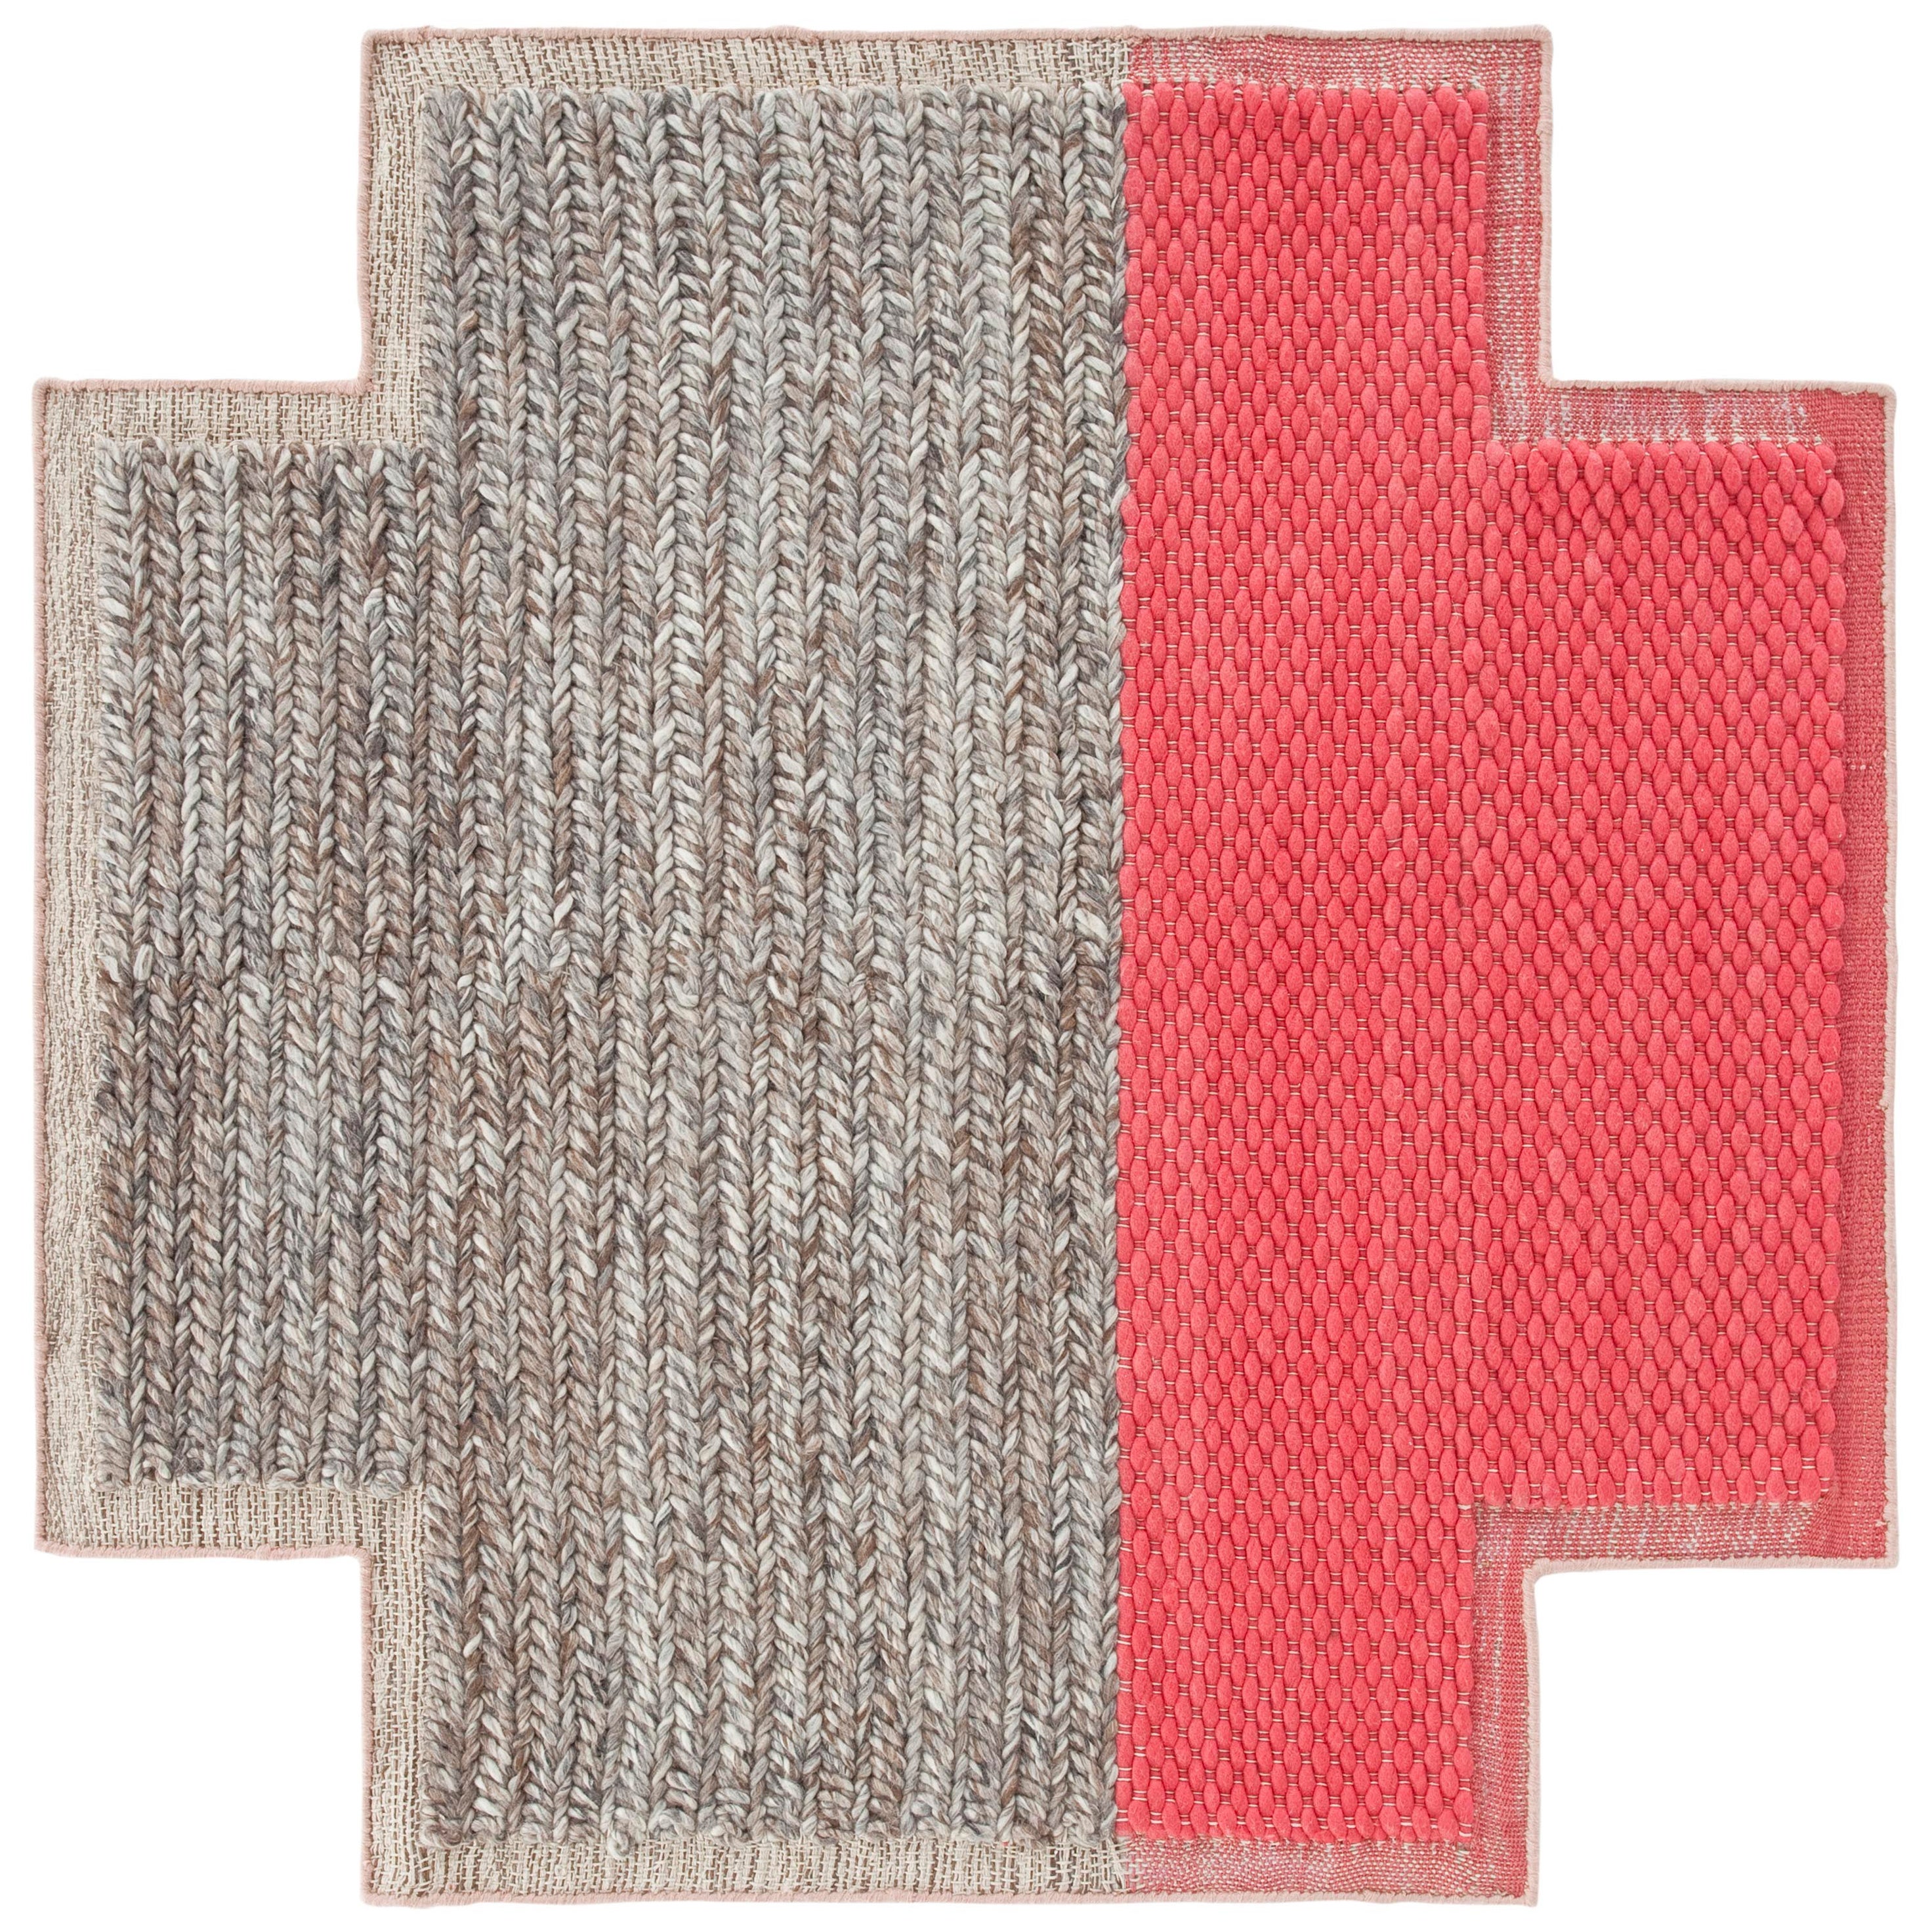 GAN Mangas Space Large Square Rug Plait in Coral by Patricia Urquiola For Sale